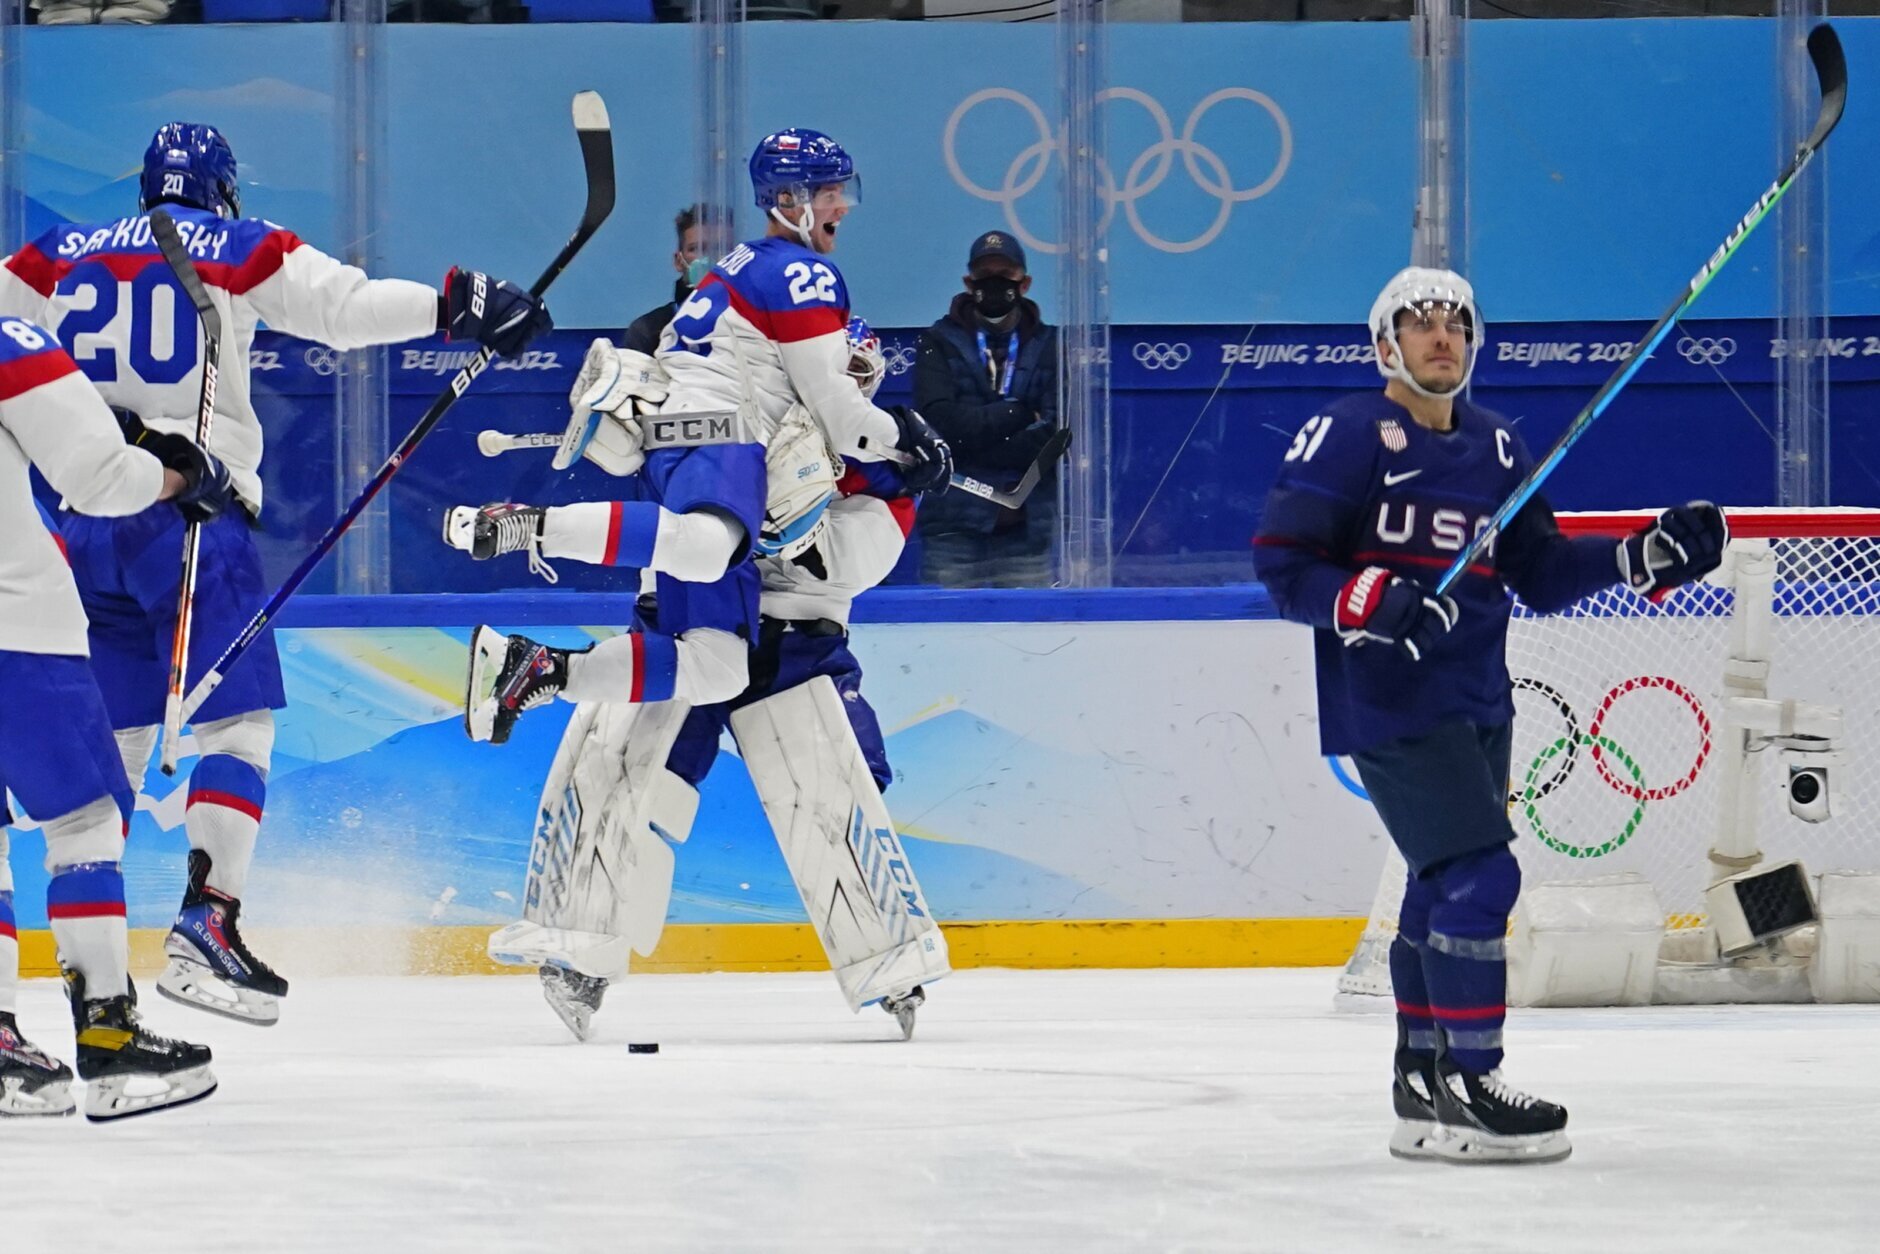 <p>Slovakia&#8217;s Samuel Knazko (22) jumps onto goalkeeper Patrik Rybar after Rybar blocked the final shoot-out attempt by United States&#8217; Andy Miele, right, during a men&#8217;s quarterfinal hockey game at the 2022 Winter Olympics, Wednesday, Feb. 16, 2022, in Beijing. Slovakia won 3-2.</p>
